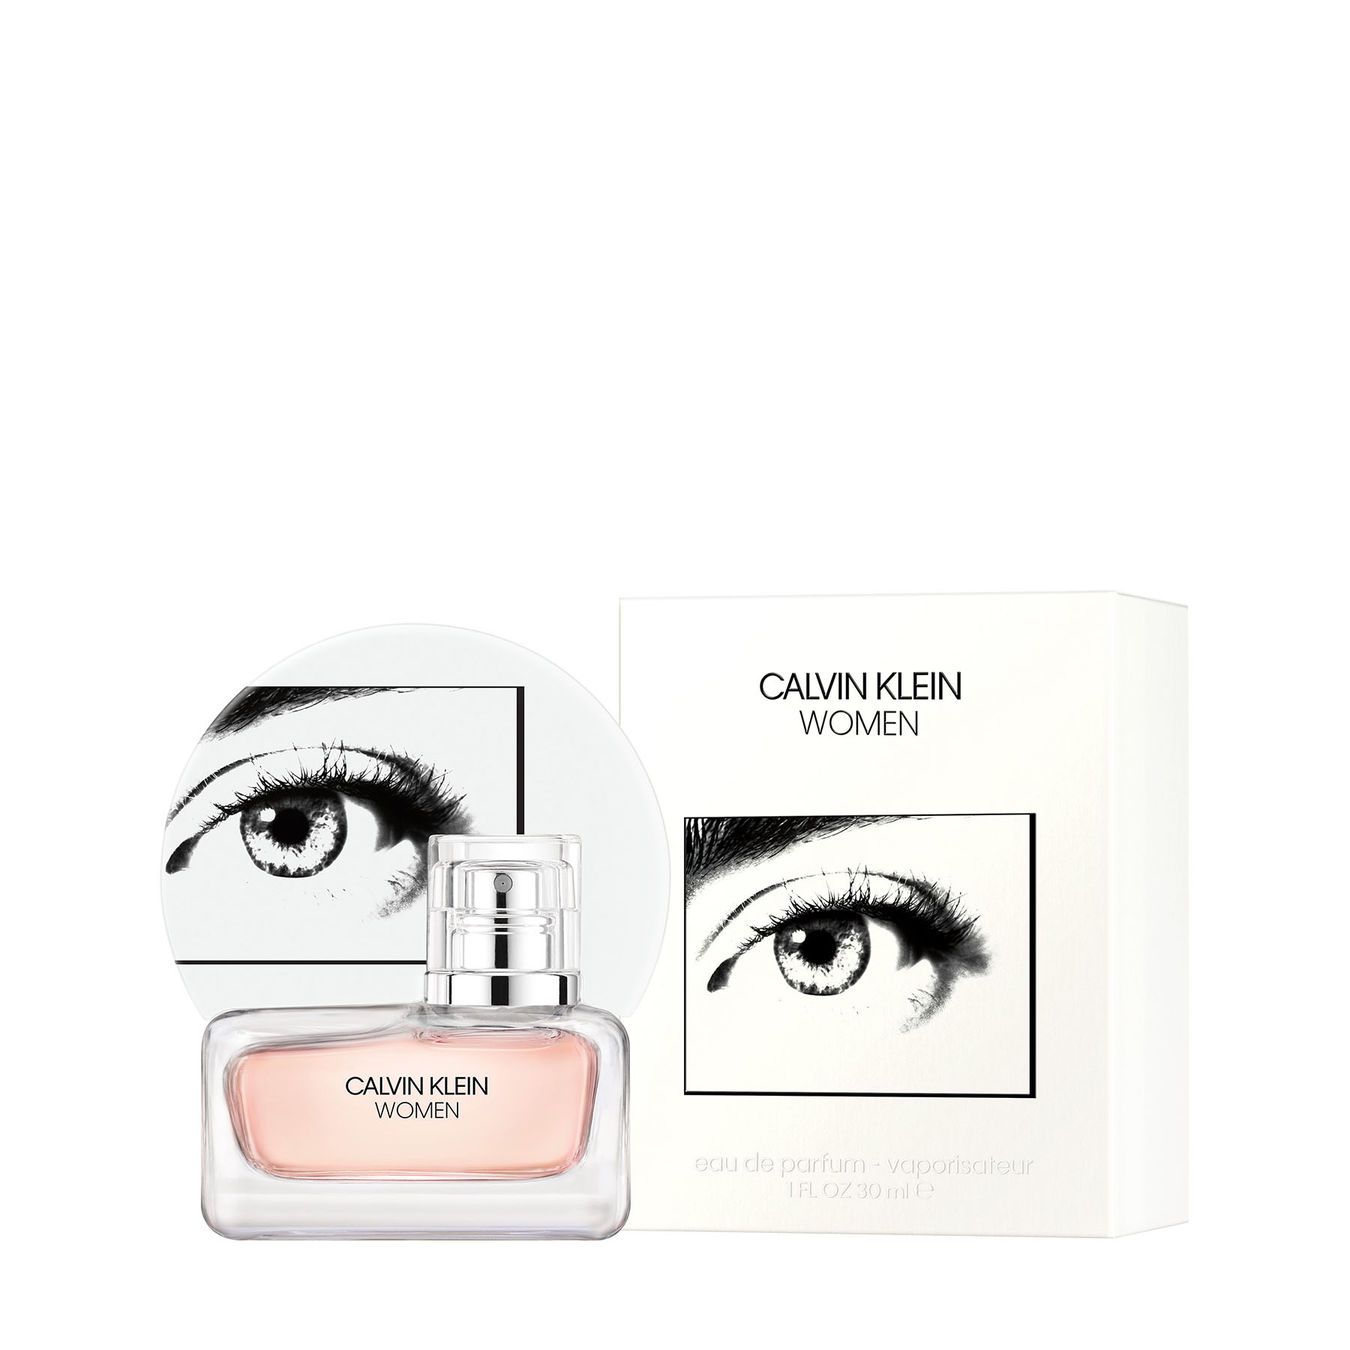 The first fragrance ever created by Raf Simons, Calvin Klein WOMEN denotes not one, but many-a group of individuals, each with their own distinct voice. Drawing inspiration from the beautiful strength and delicate tenderness of the female experience, this fragrance celebrates the feminine spirit in all its forms. A light pink hue composed of gentle and vulnerable ingredients. Delicate orange flower petals layered with fresh eucalyptus acorns open to reveal a rich heart of Alaskan cedarwood. Calvin Klein WOMEN is a tribute to the contrasts with femininity. Infinitely varied and deeply complex, like the personas of the women who inspire it. The female eye artwork featured on the bottle, created by artist Anne Collier, represents an iconic emblem of the #IAMWOMEN campaign and serves as a source of strength and emotion.

A woody floral
Top Notes: Eucalyptus Acorns
Middle Notes: Orange Flower
Bottom Notes: Alaskan Cedarwood